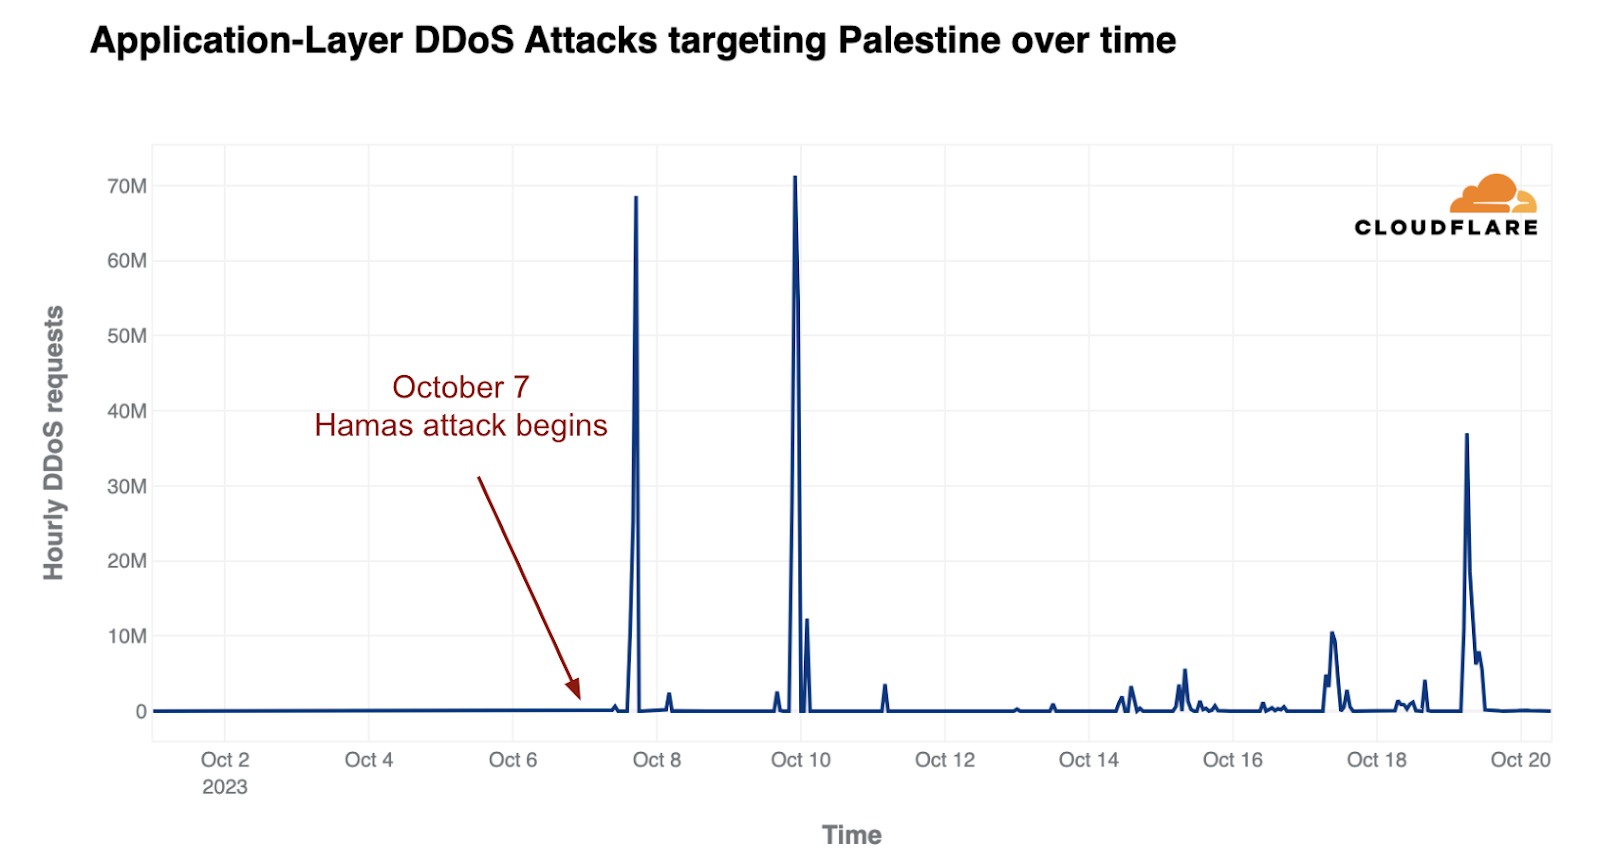 HTTP DDoS attacks against Palestinian websites using Cloudflare